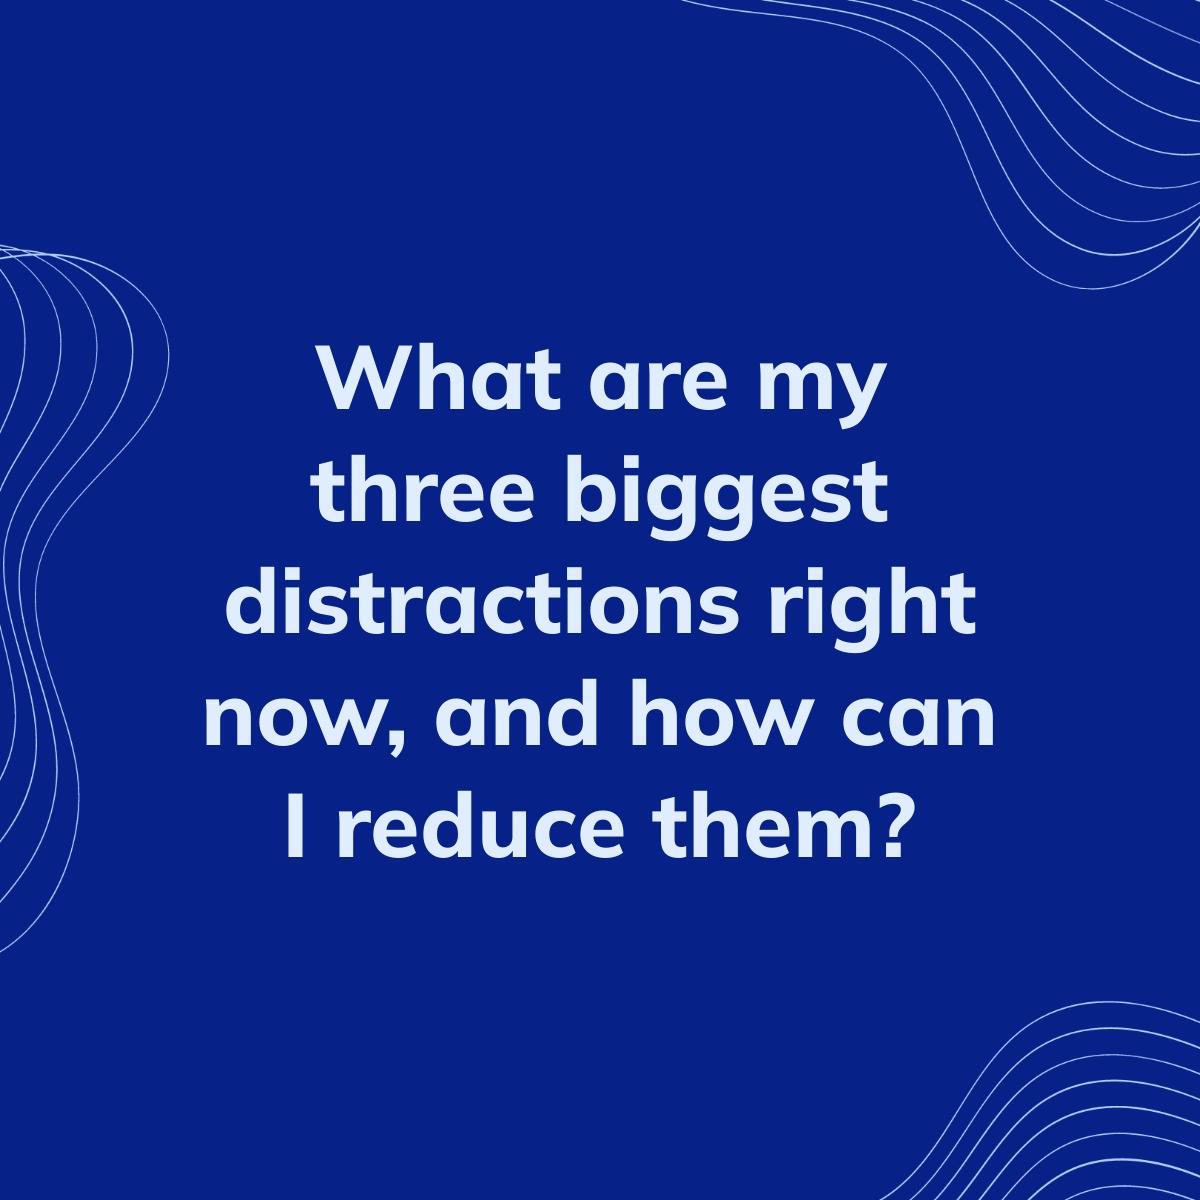 Journal Prompt: What are my three biggest distractions right now, and how can I reduce them?